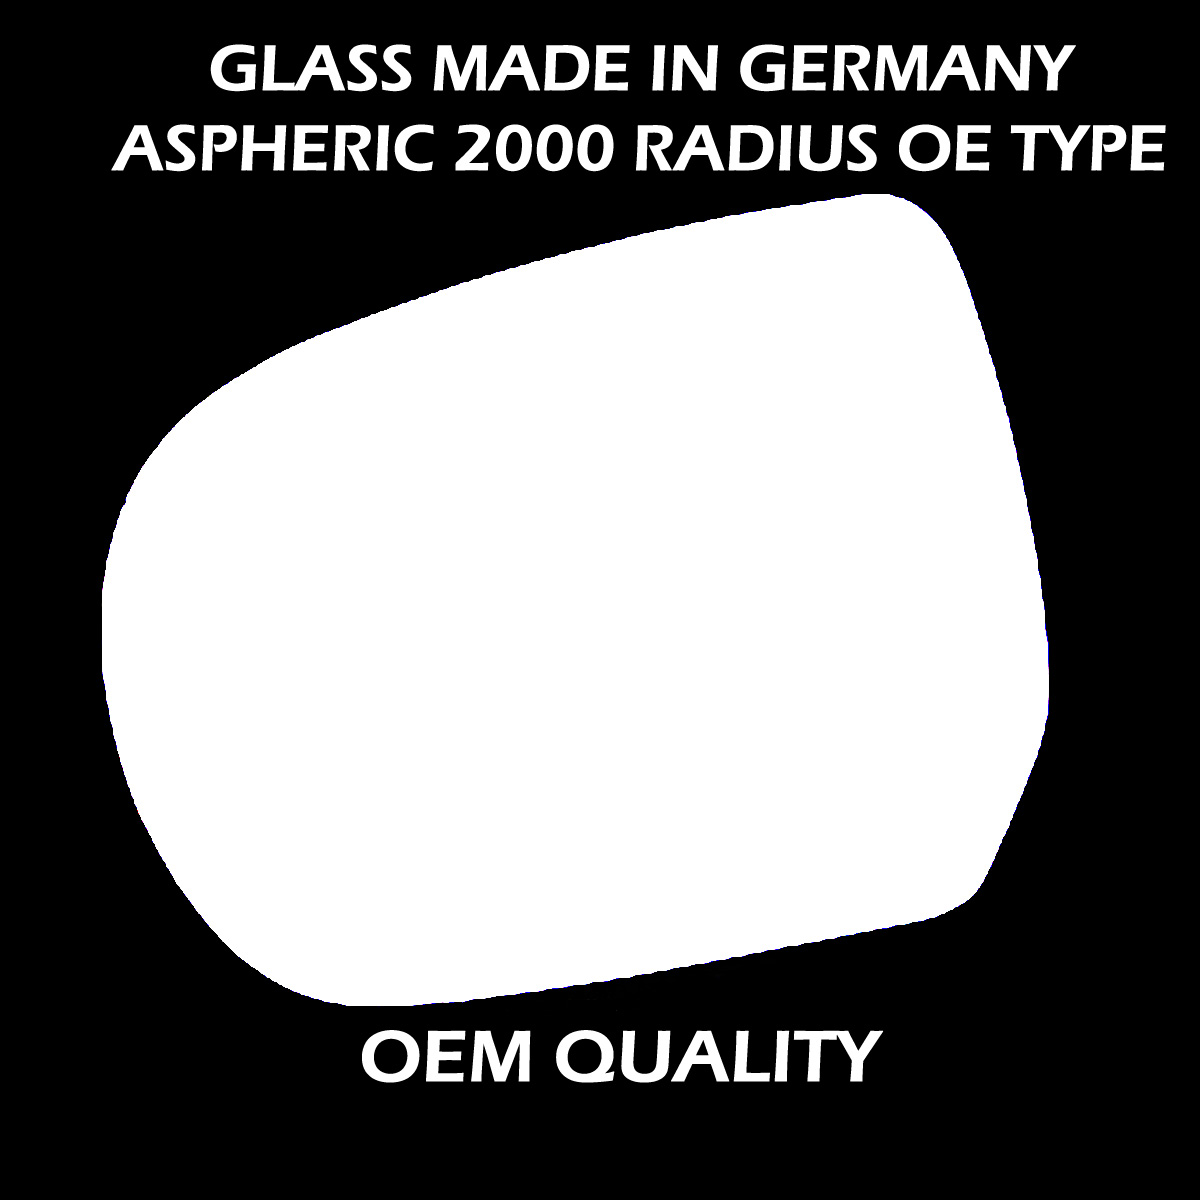 Ford Maverick Wing Mirror Glass LEFT HAND ( UK Passenger Side ) 2000 to 2006 – Convex Wing Mirror